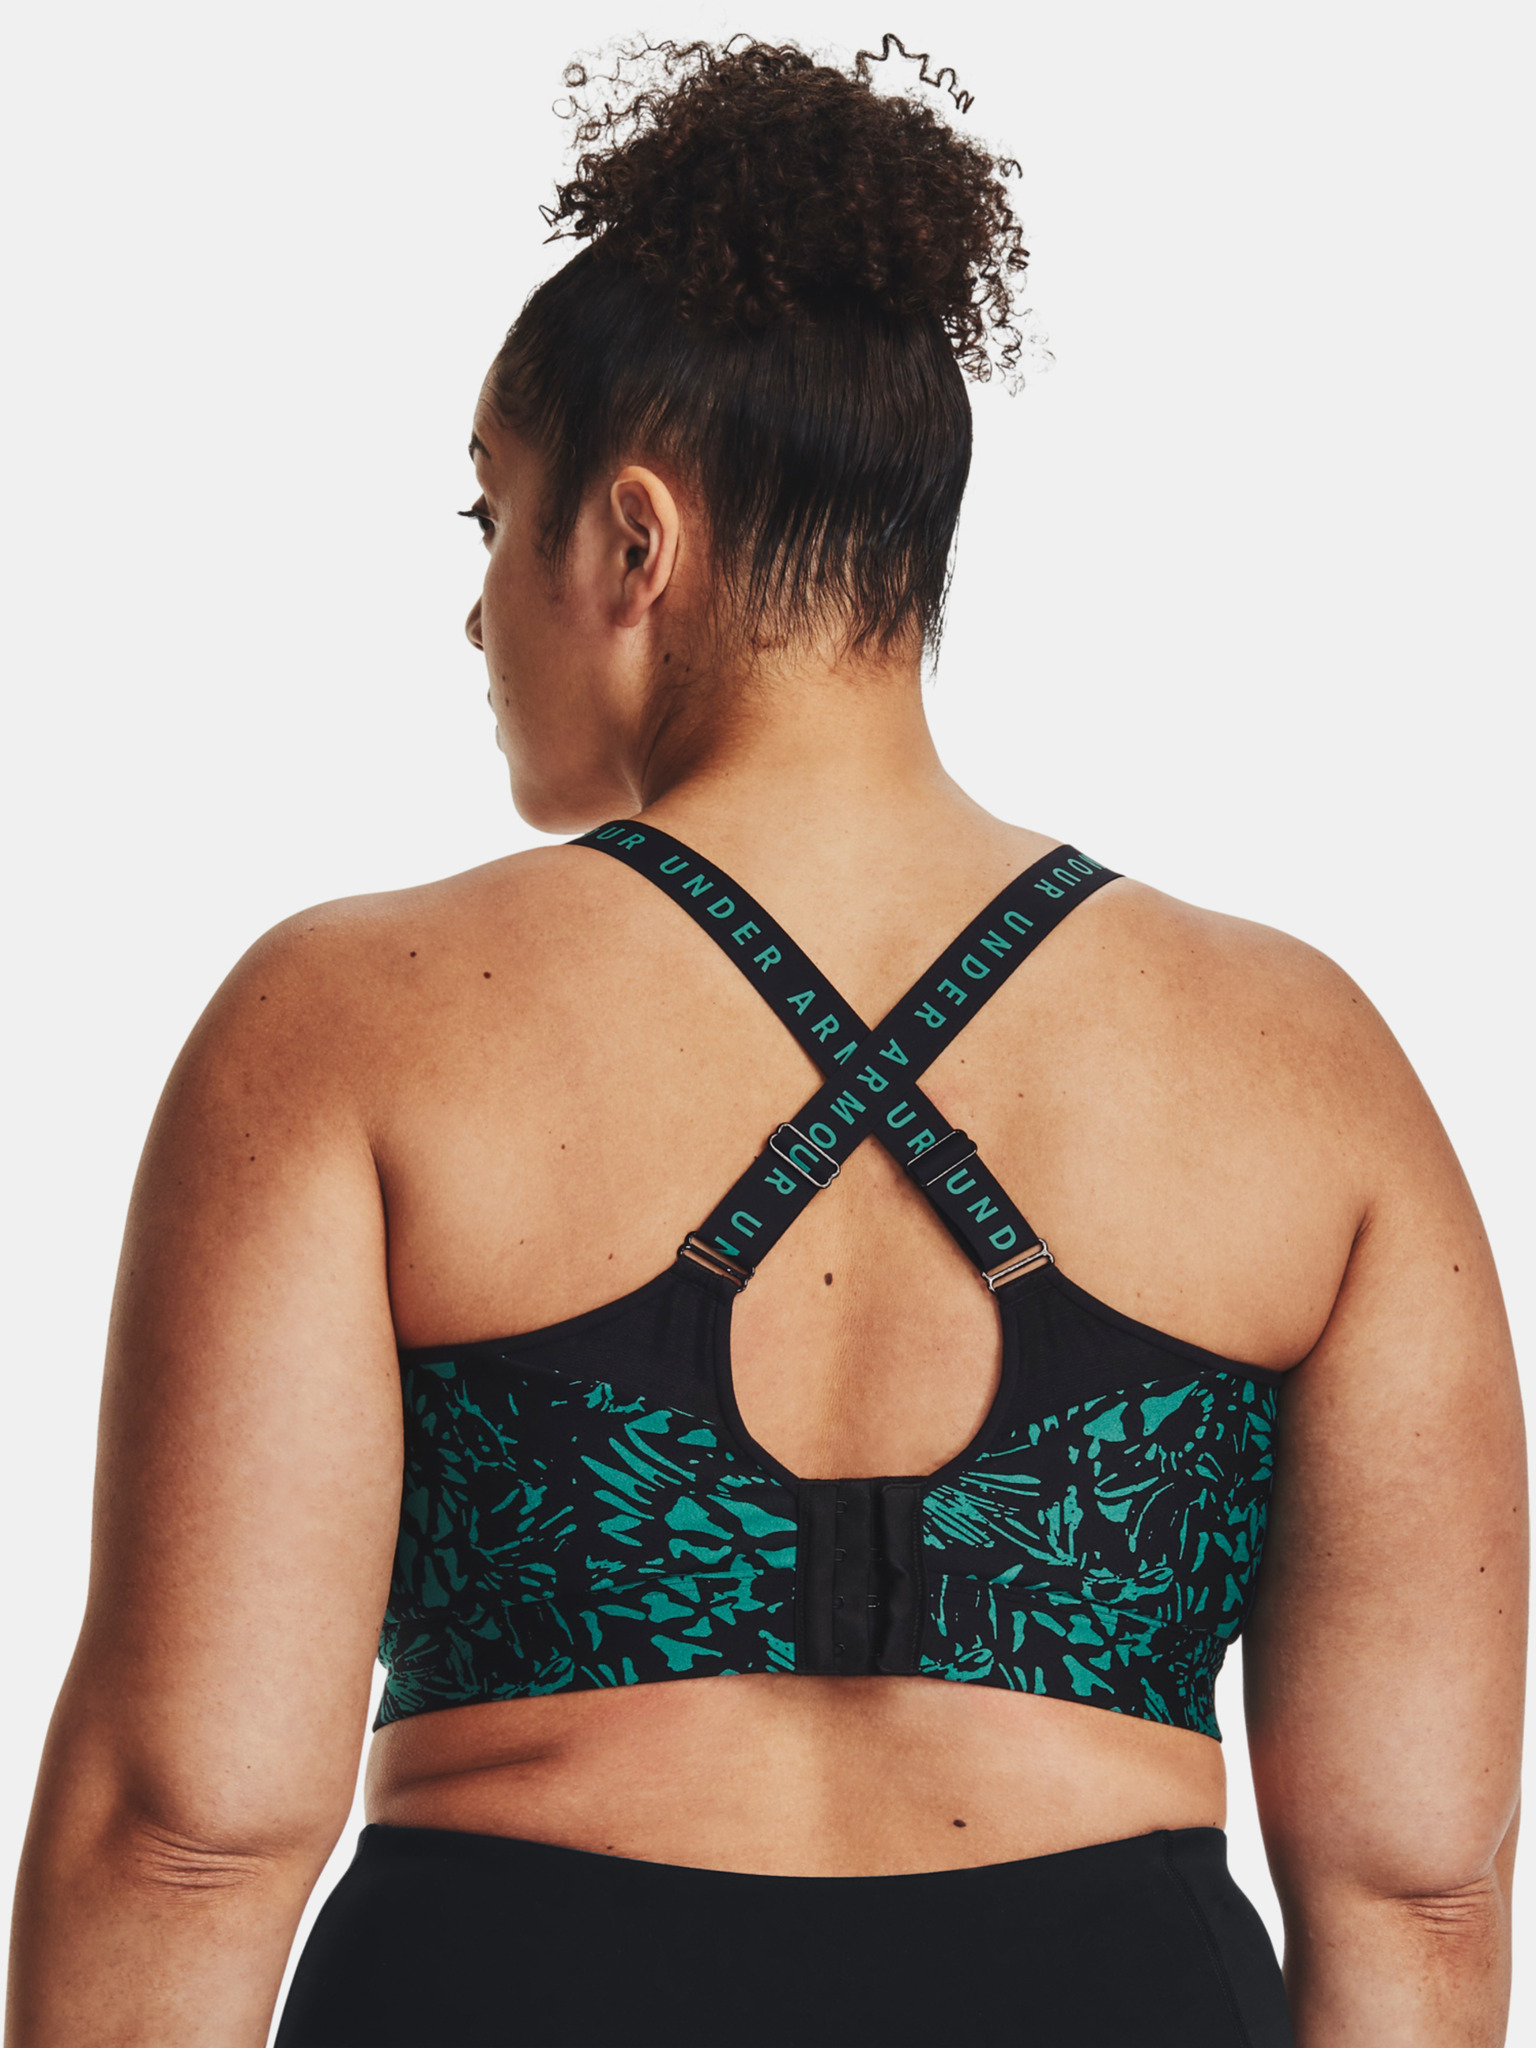 Under Armour Infinity Womens High Printed Sports Bra in Black